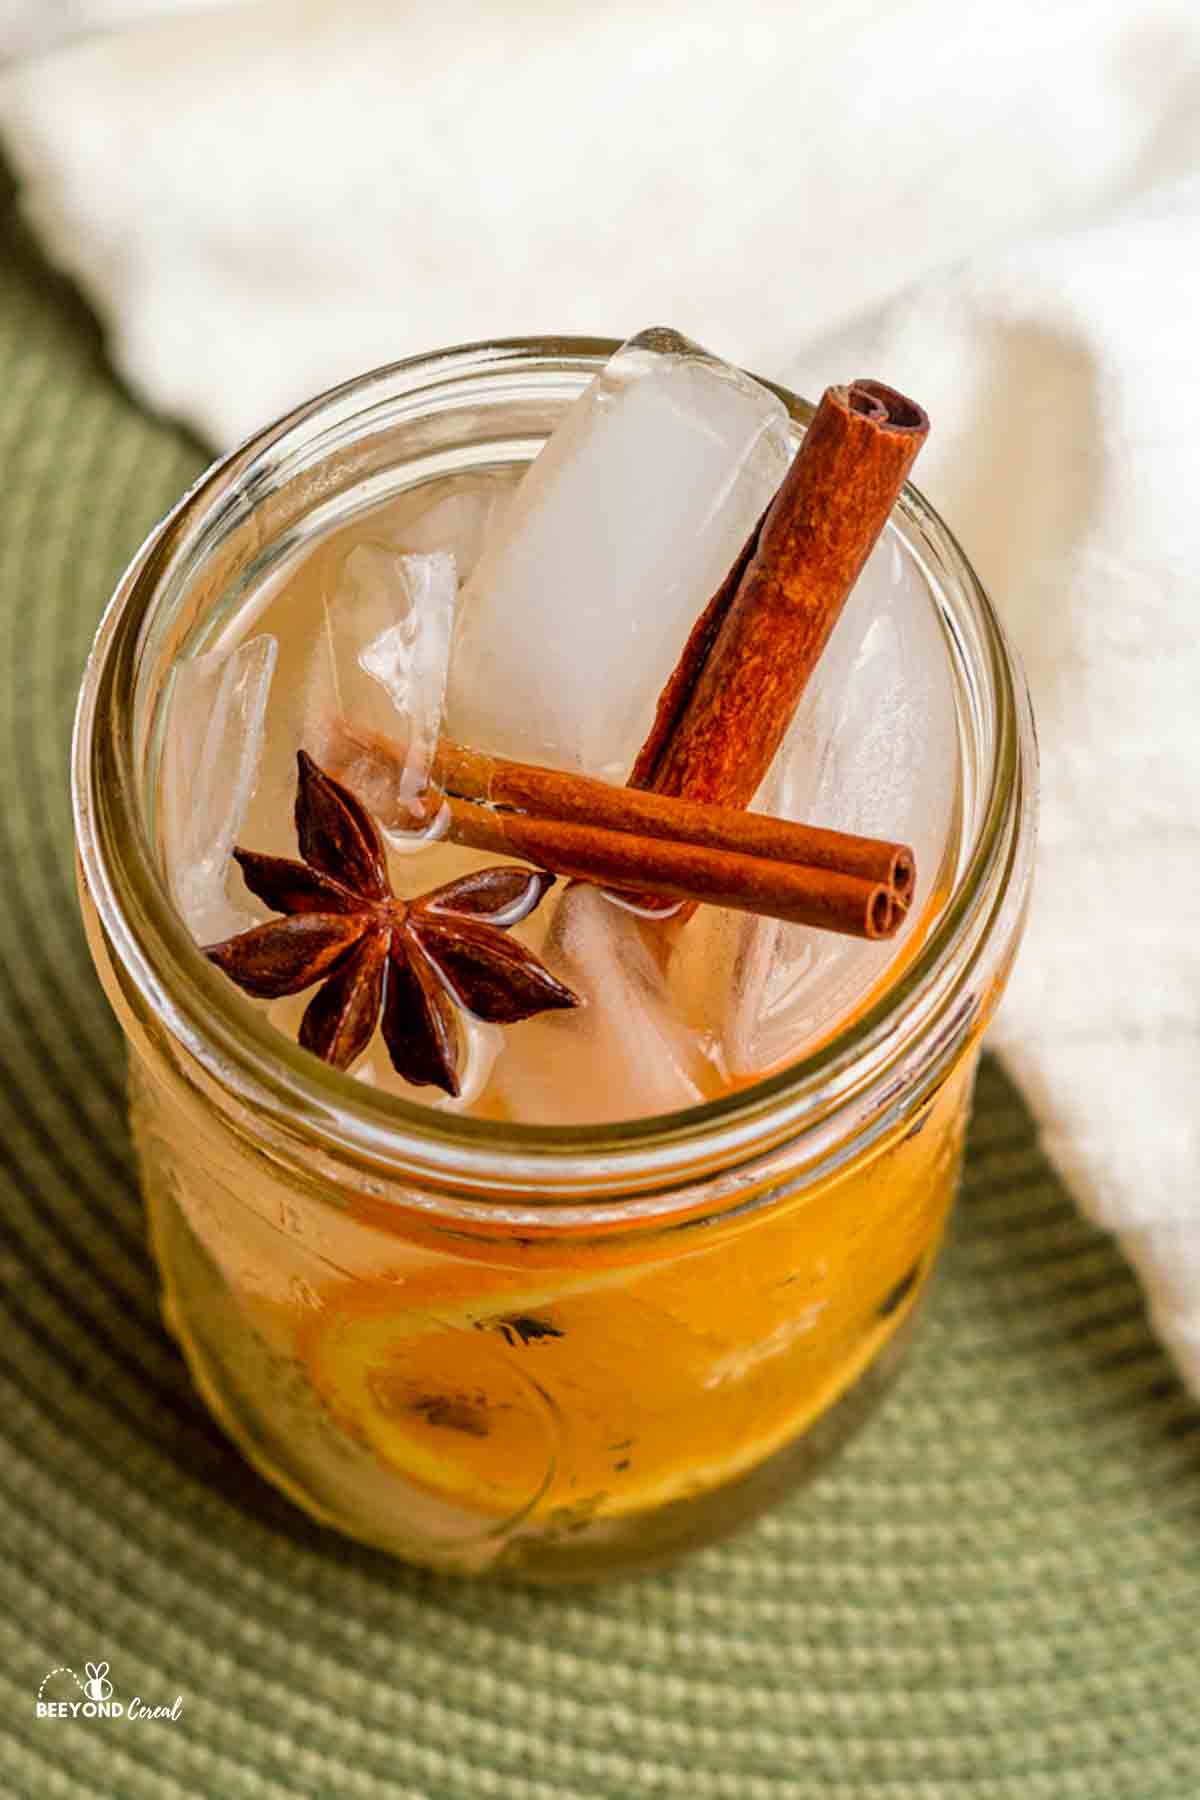 two cinnamon sticks and a star anise in an iced jar of spiced ginger ale